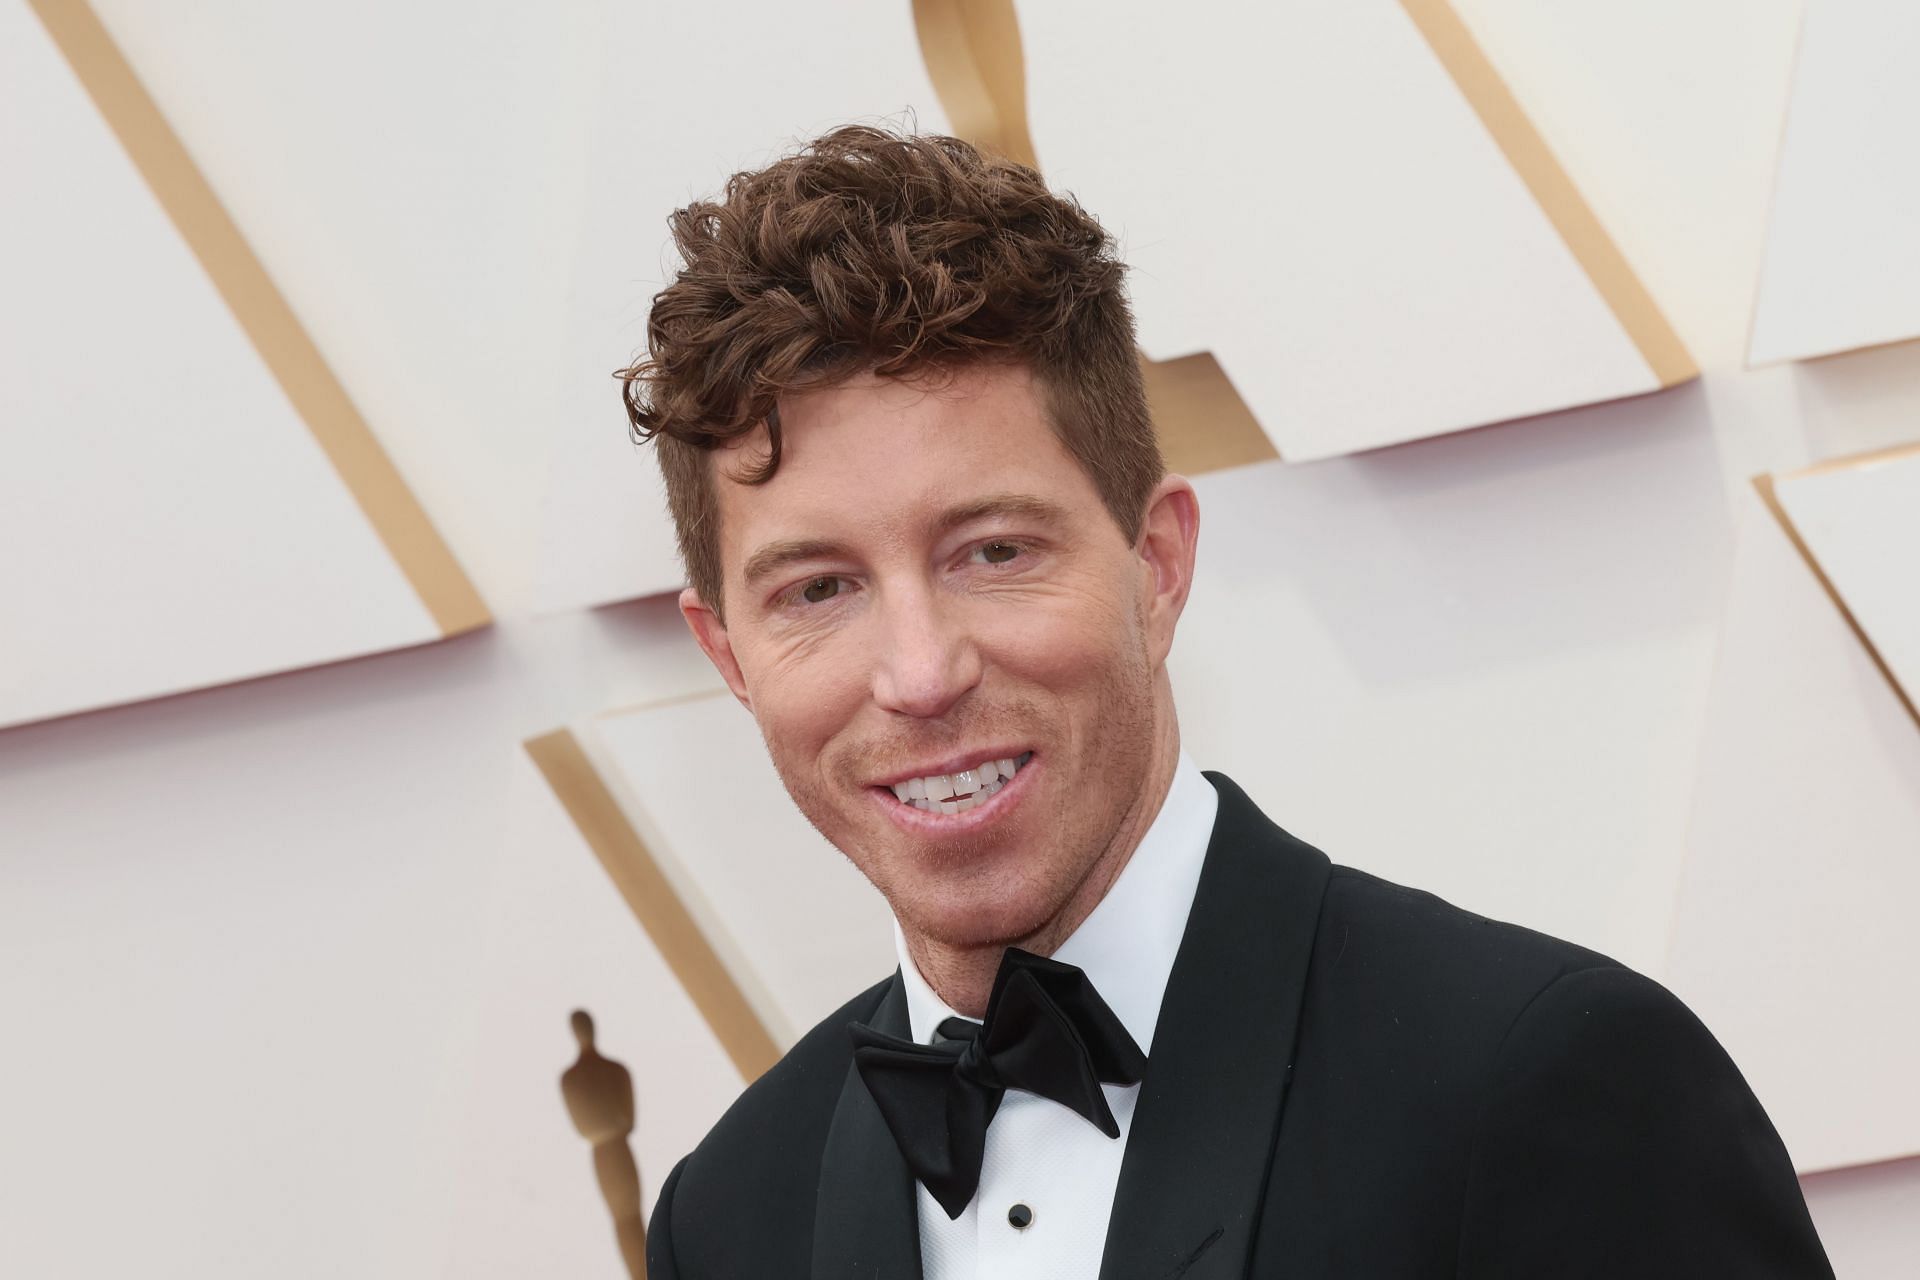 Shaun White at the 94th Annual Academy Awards.